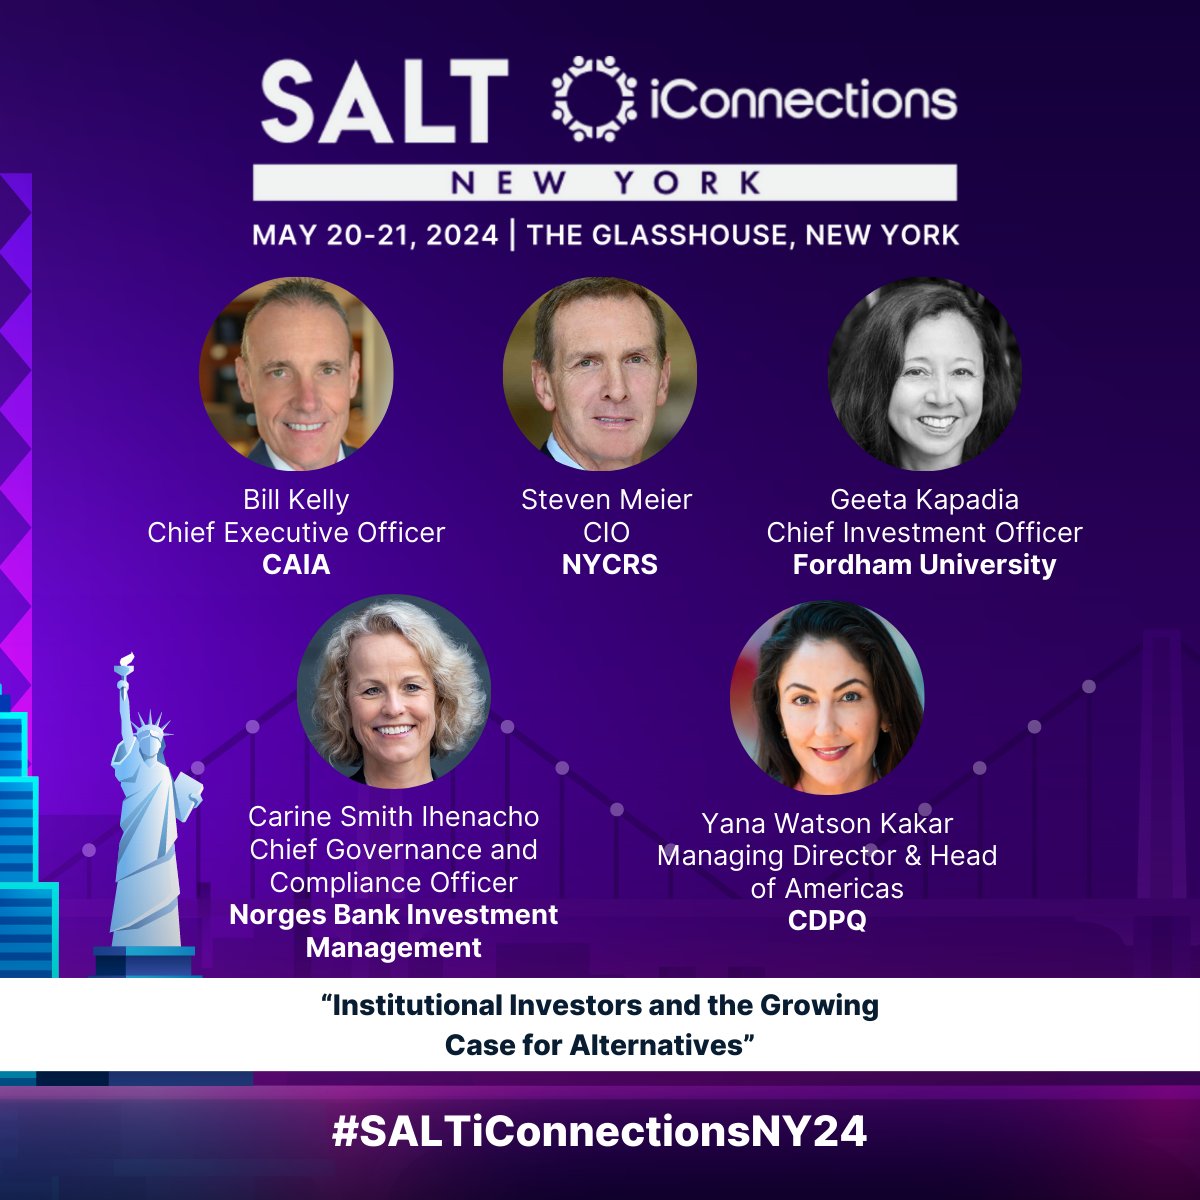 #SALTiConnectionsNY Panel Announcement! 'Institutional Investors and the Growing Case for Alternatives' 🎙: Bill Kelly | @CAIAAssociation Steven Meier | NYCRS Geeta Kapadia | @FordhamNYC Carine Smith Ihenacho | @NorgesBank @YanaKakar | CDPQ @SALTConference